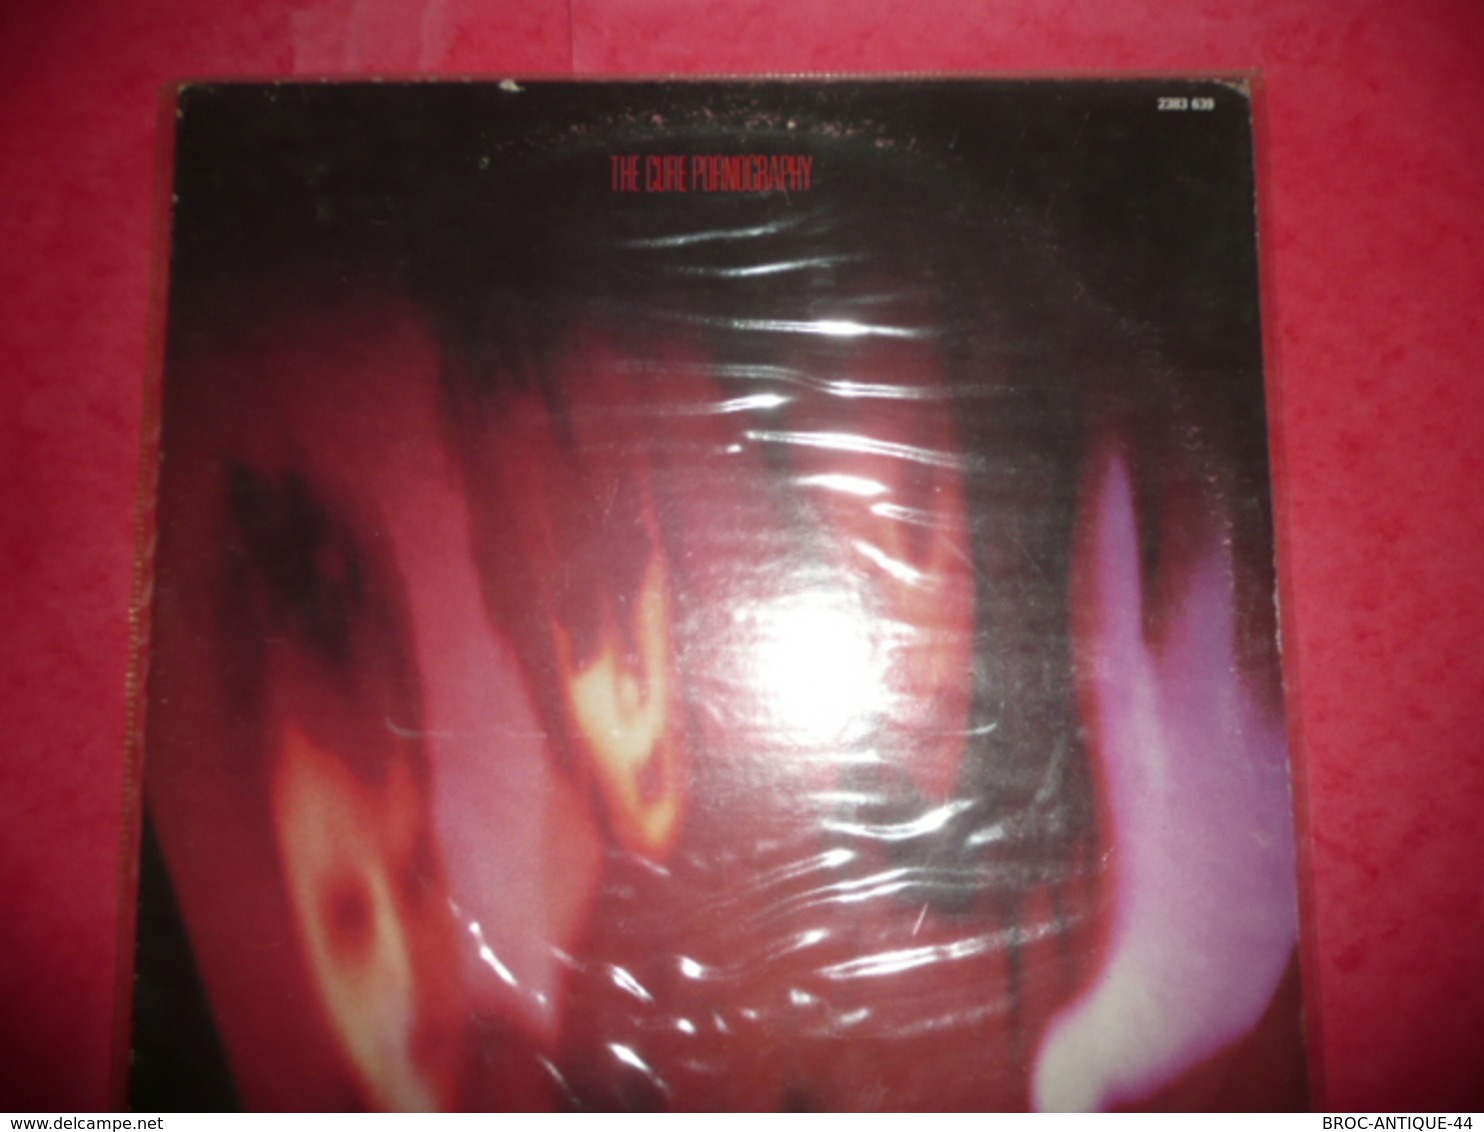 LP N°1600 - THE CURE - PORNOGRAPHY - COMPILATION 8 TITRES ROCK PSYCHEDELIC POP NEW WAVE - Rock